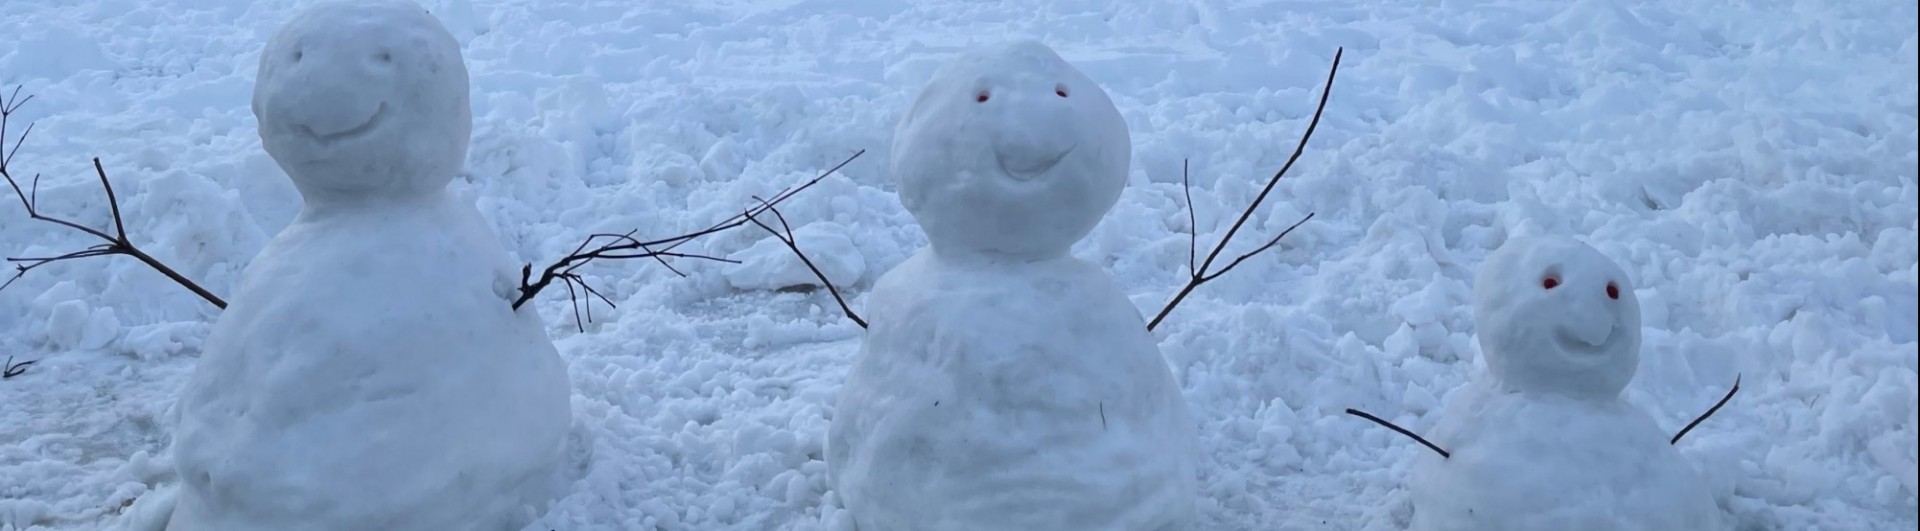 Three smiling snow people with stick arms on snow-covered ground.